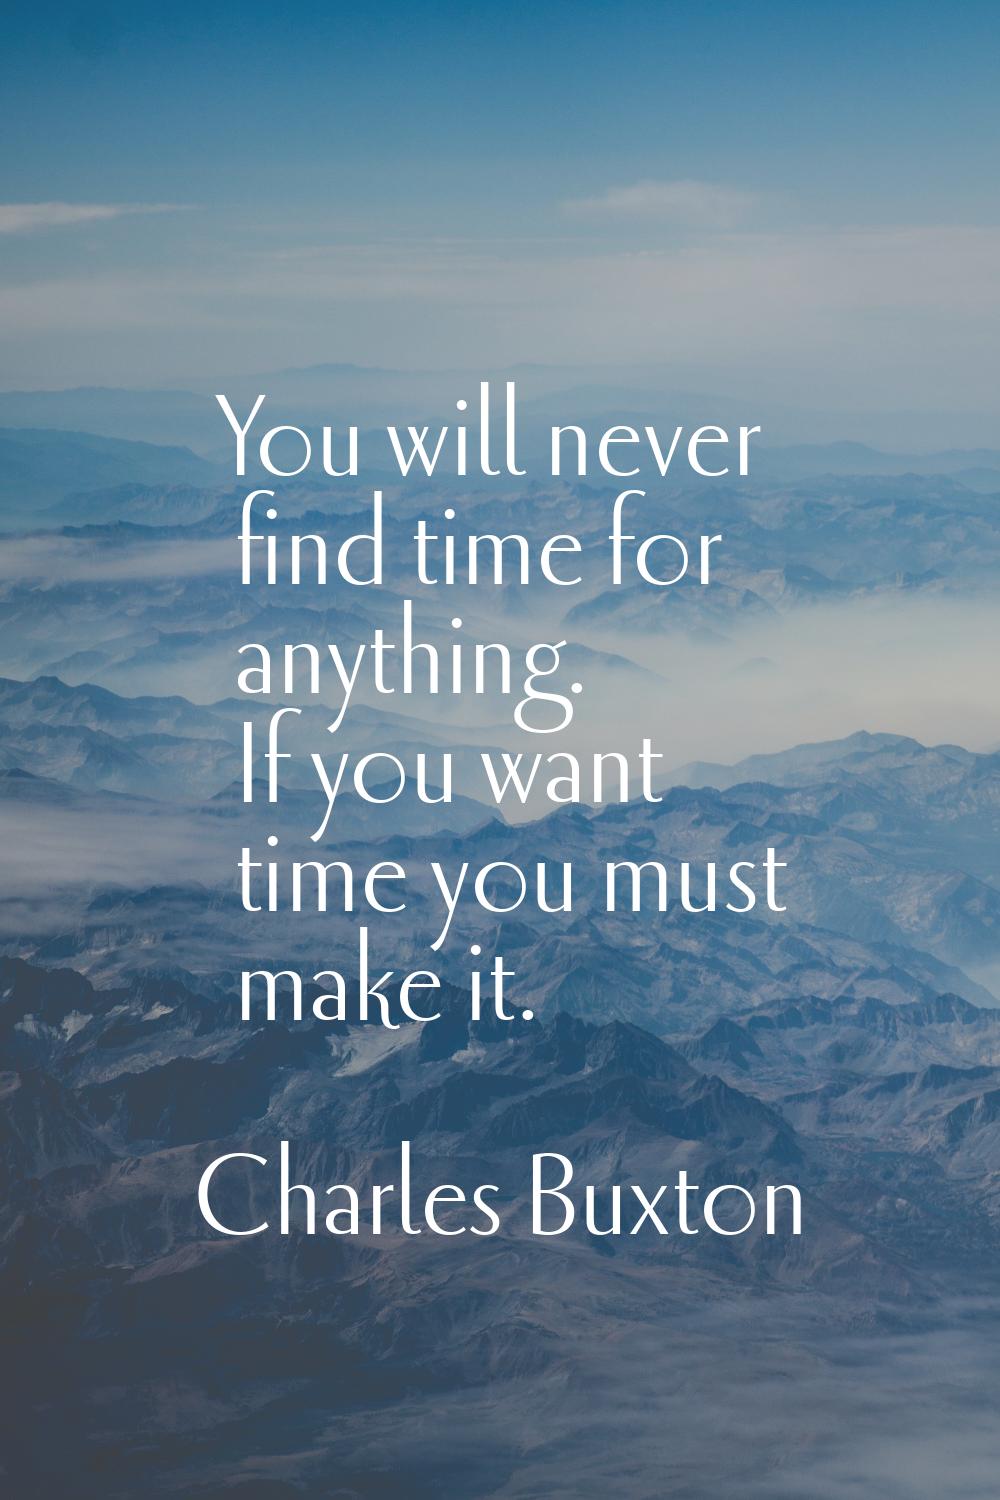 You will never find time for anything. If you want time you must make it.